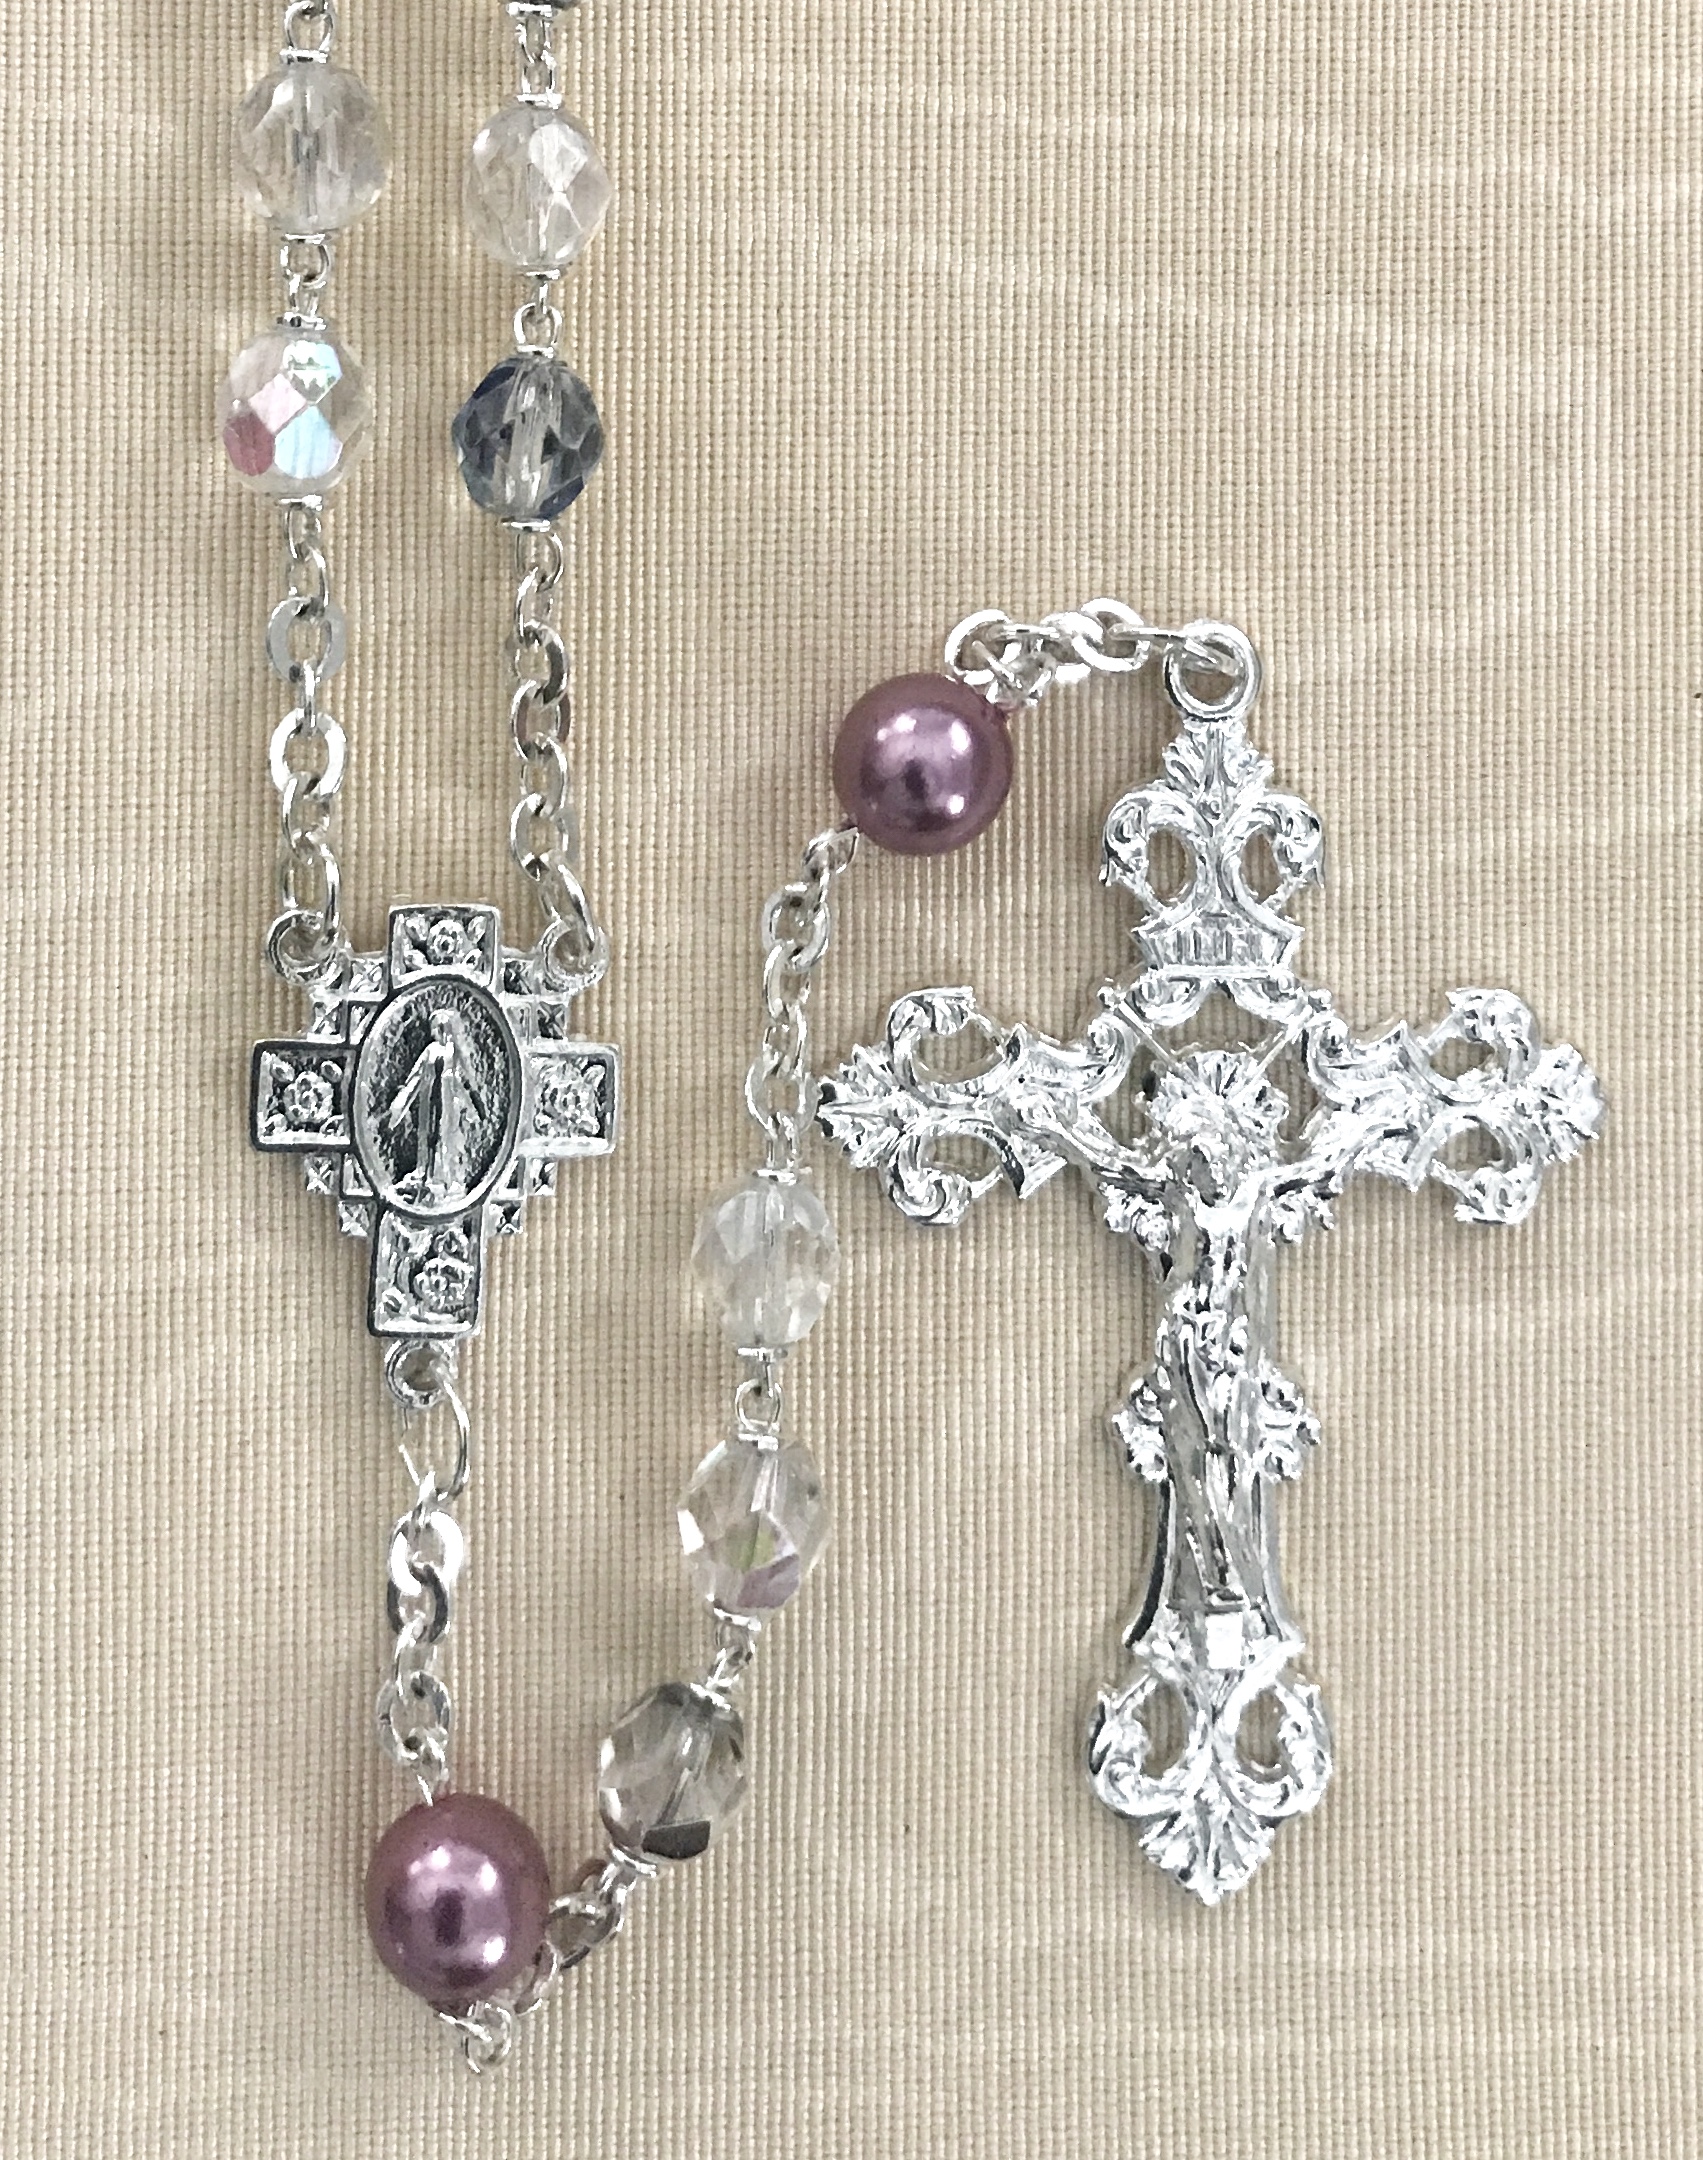 7mm CRYSTAL AB WITH DARK AMETHYST PEARL OUR FATHER BEADS STERLING SILVER PLATED ROSARY GIFT BOXED